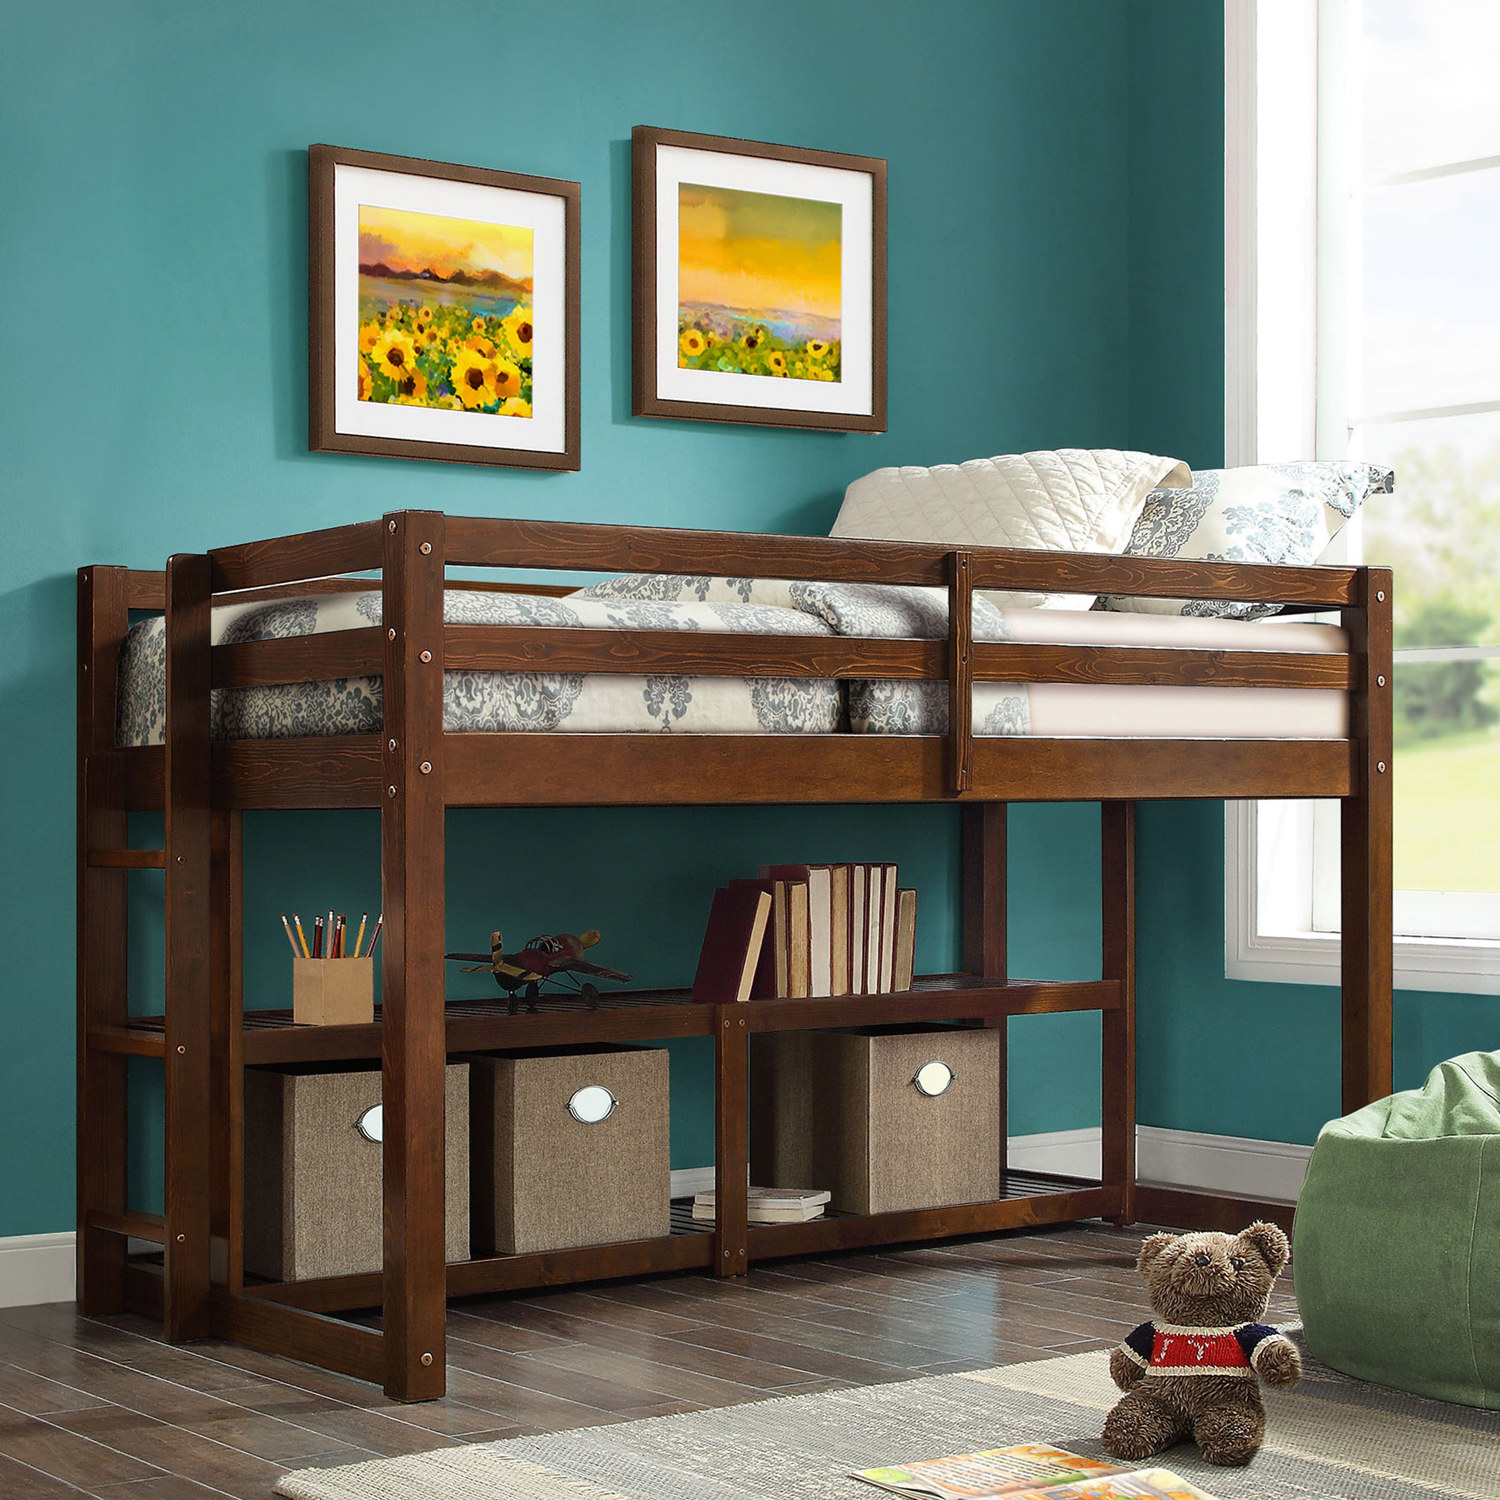 17 Loft Beds That Ll Save You So Much Space, Loft Bed With Underneath Storage